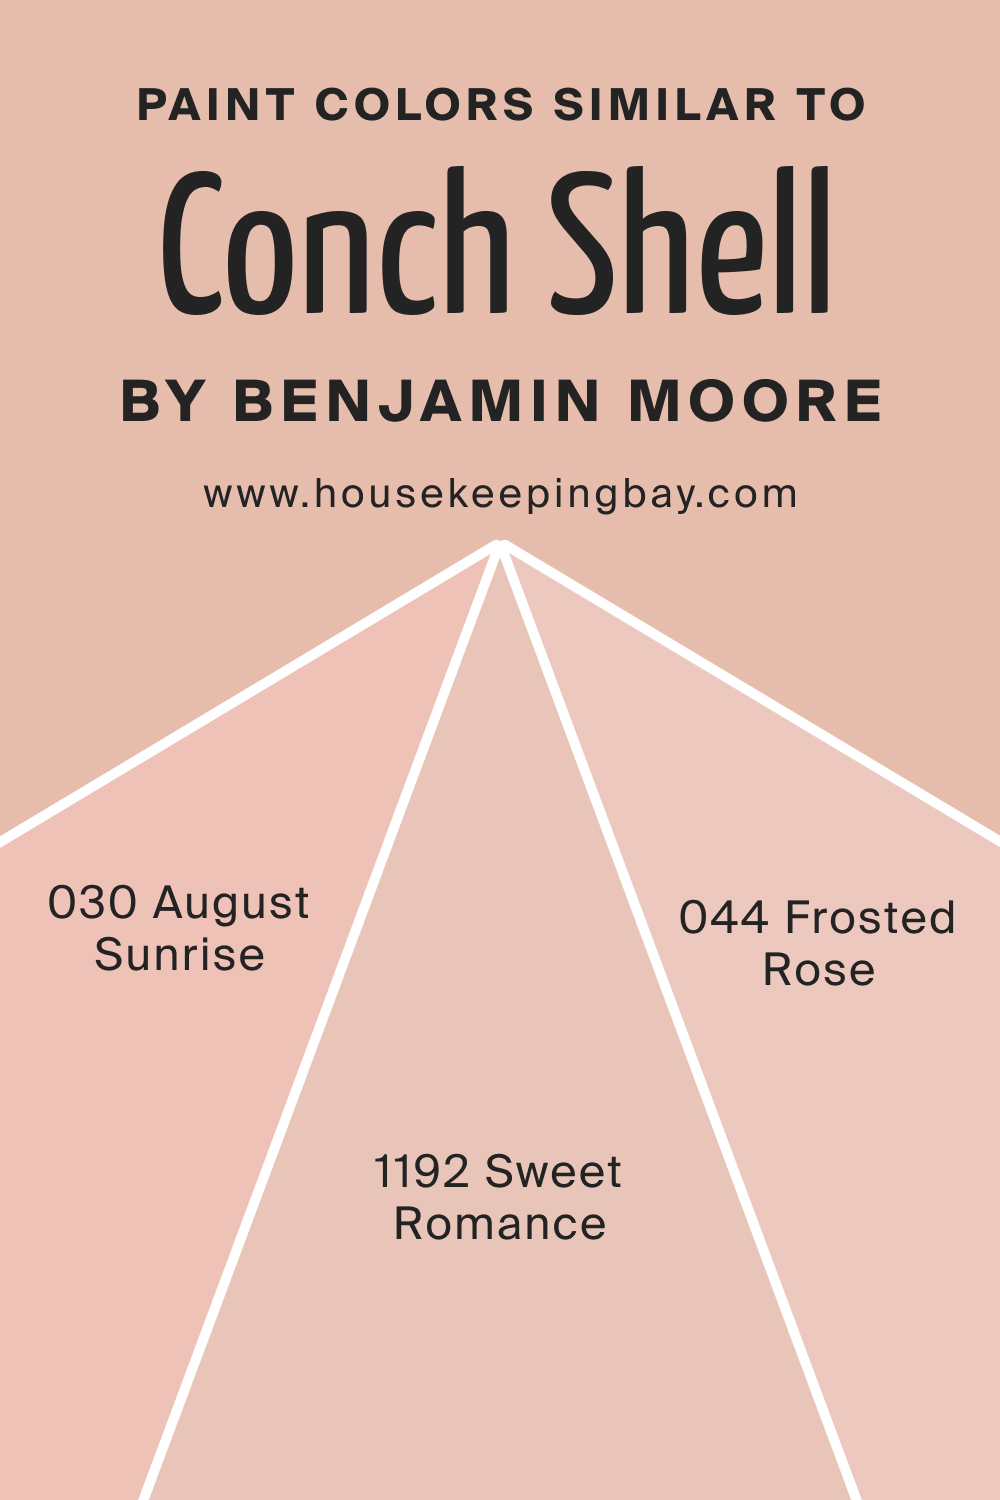 Paint Colors Similar to Conch Shell 052 by Benjamin Moore